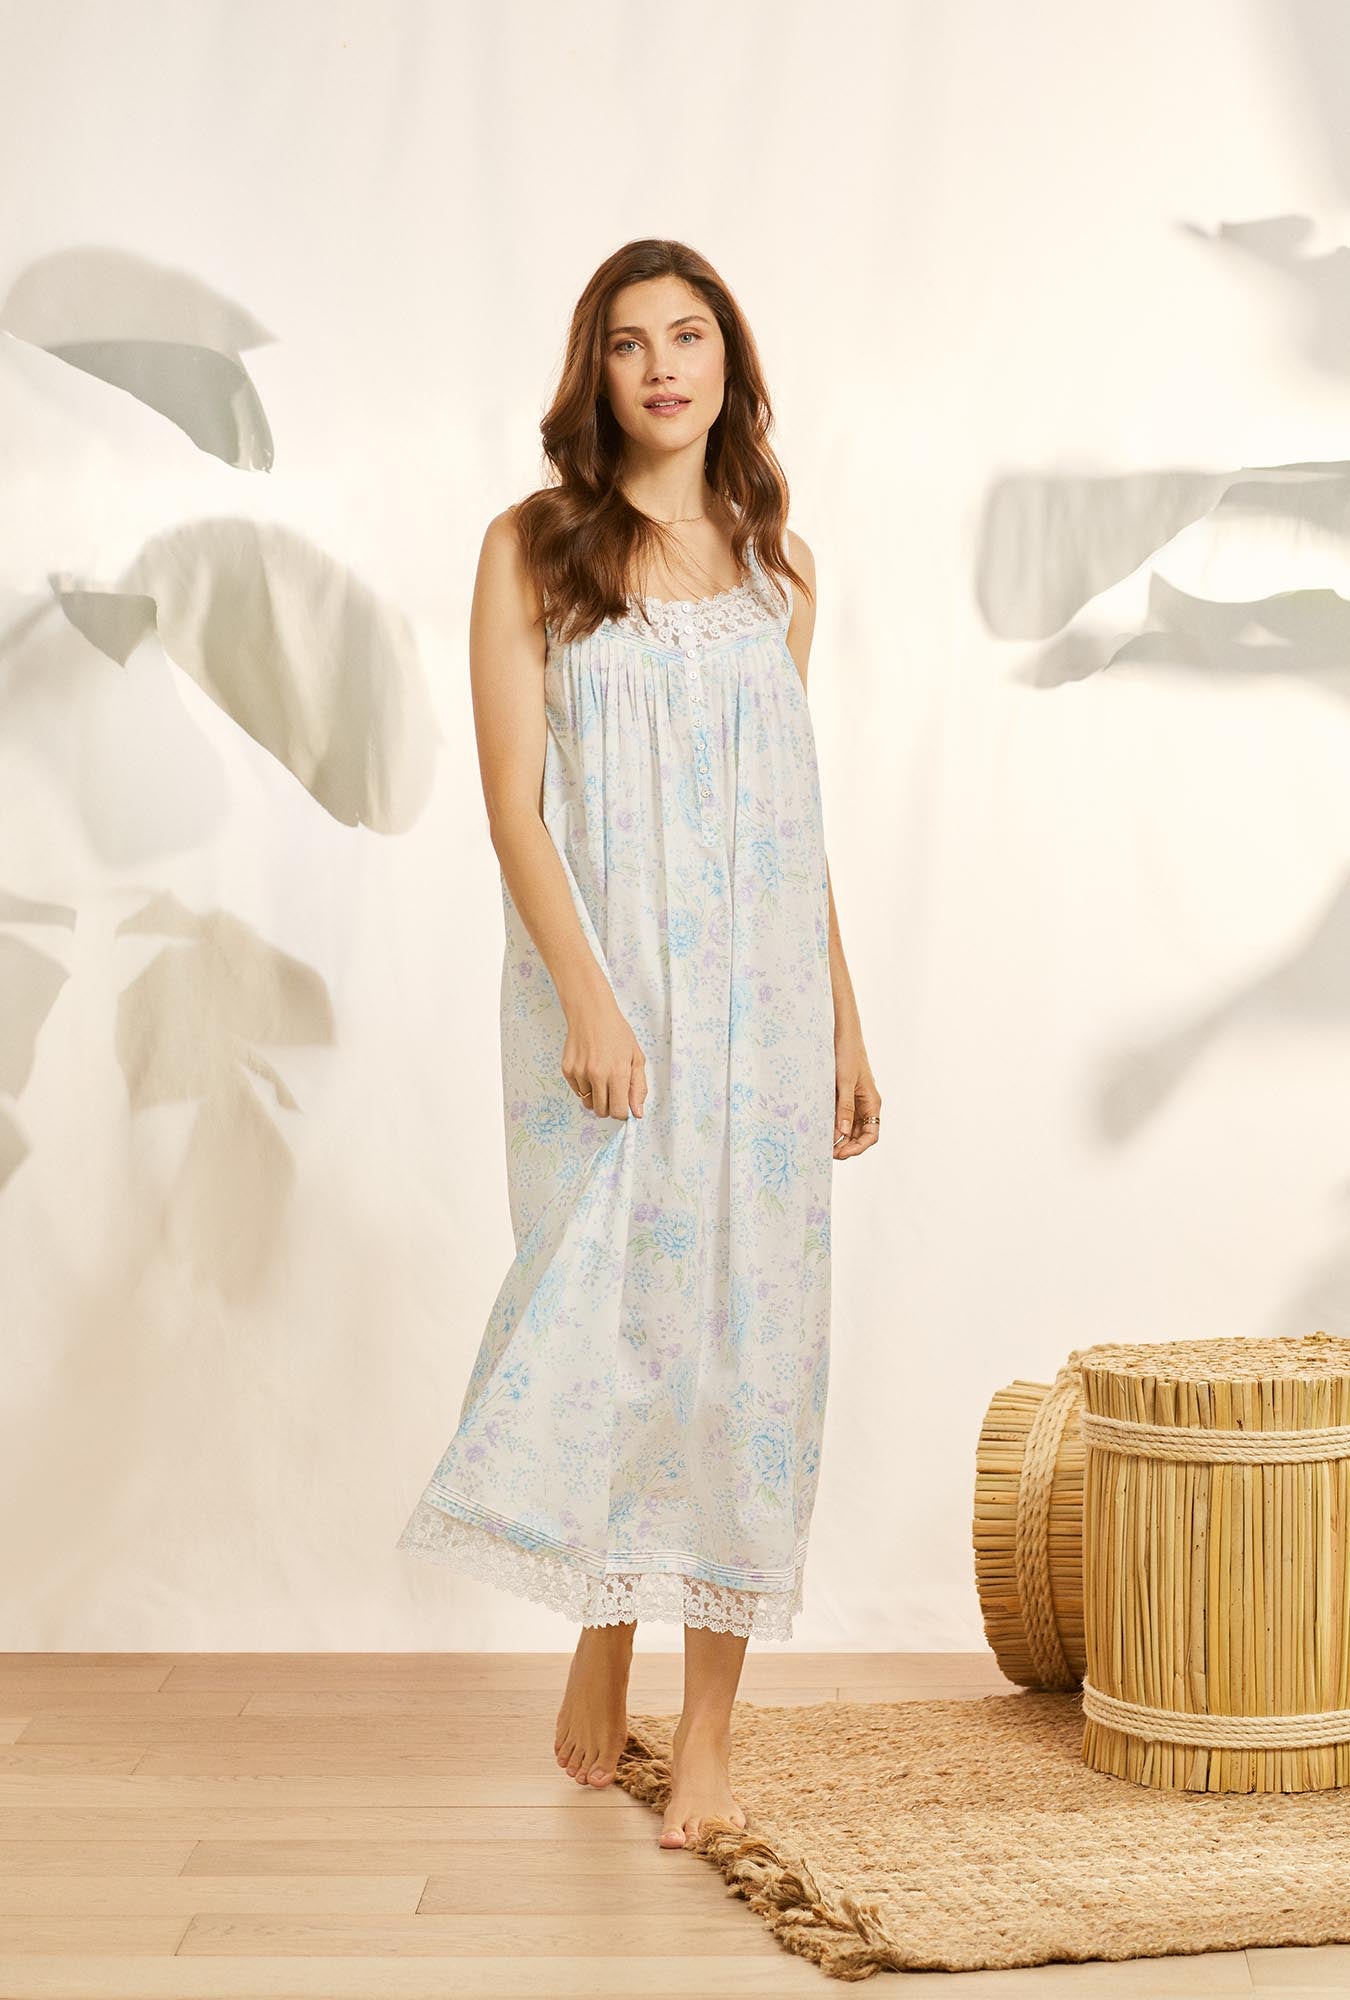 A lady wearing white sleeveless eileen cotton nightgown with summer garden print.